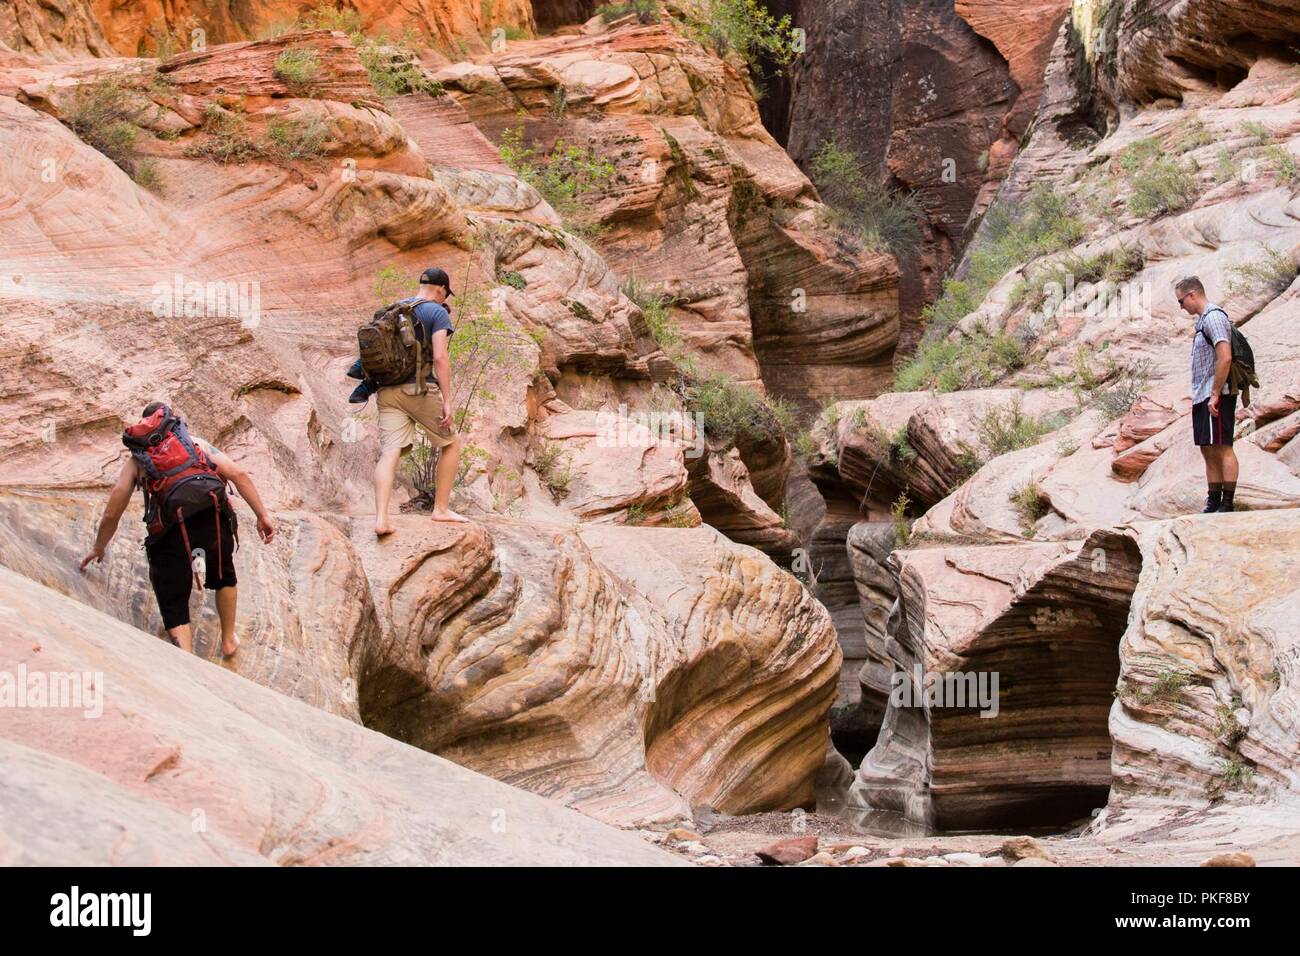 U.S. Marines hike Slot Canyons during a Single Marine Program (SMP) trip at Zion National Park, Utah, Aug. 4, 2018. During the trip, Marines had the chance to hike any trail of their choosing, many ranging in levels of difficulty and distance. Stock Photo